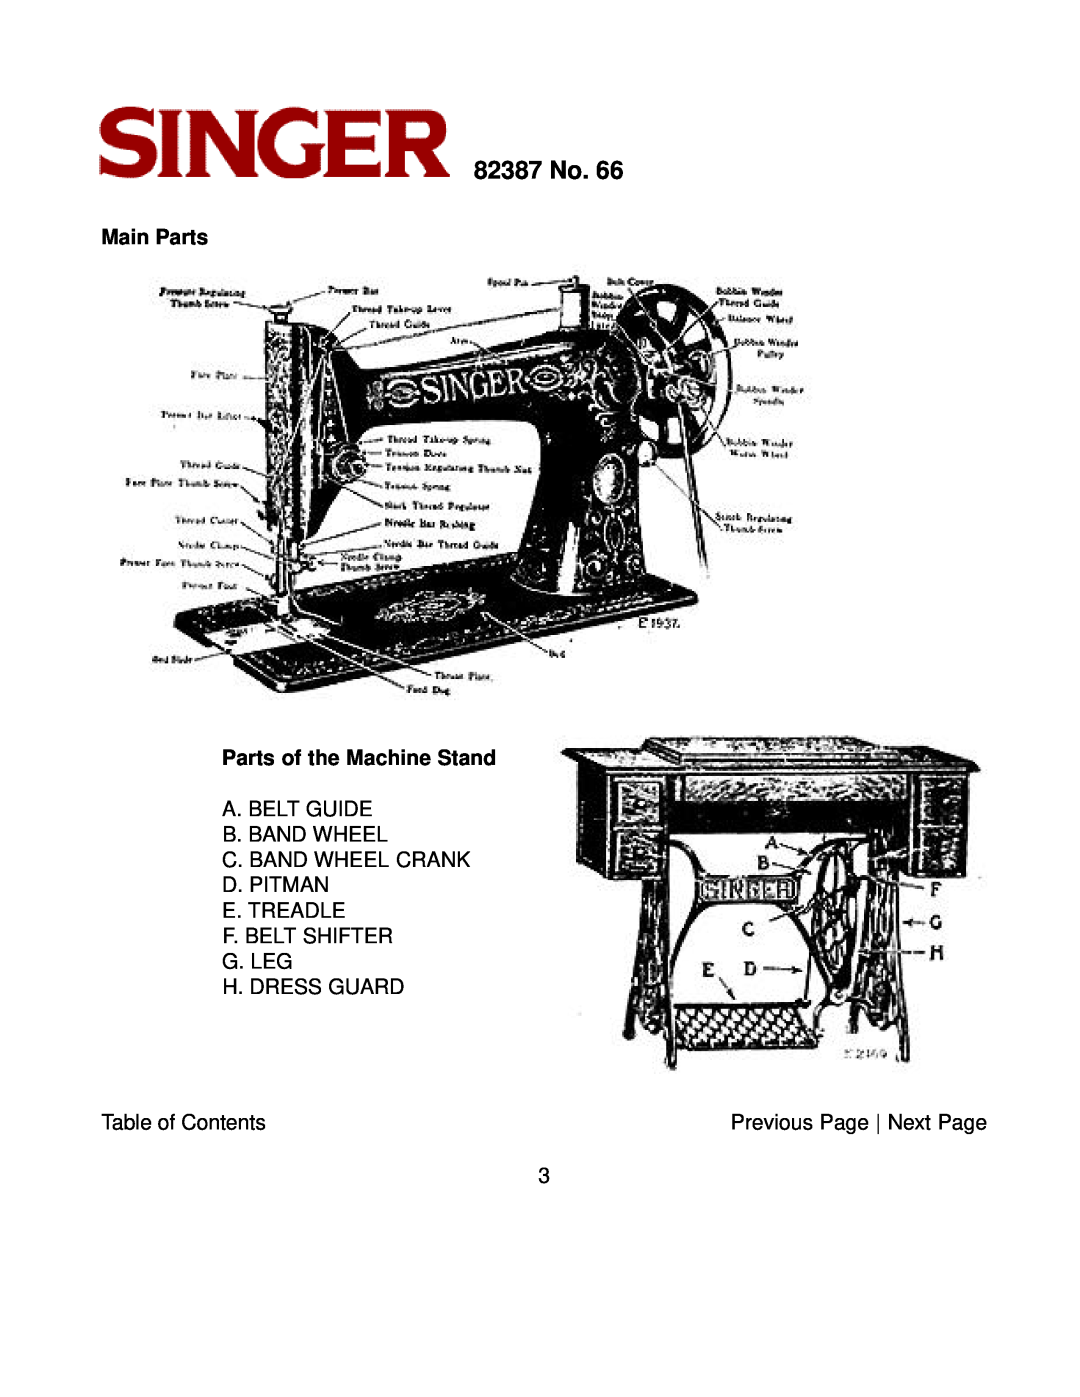 Singer instruction manual Main Parts Parts of the Machine Stand, 82387 No 